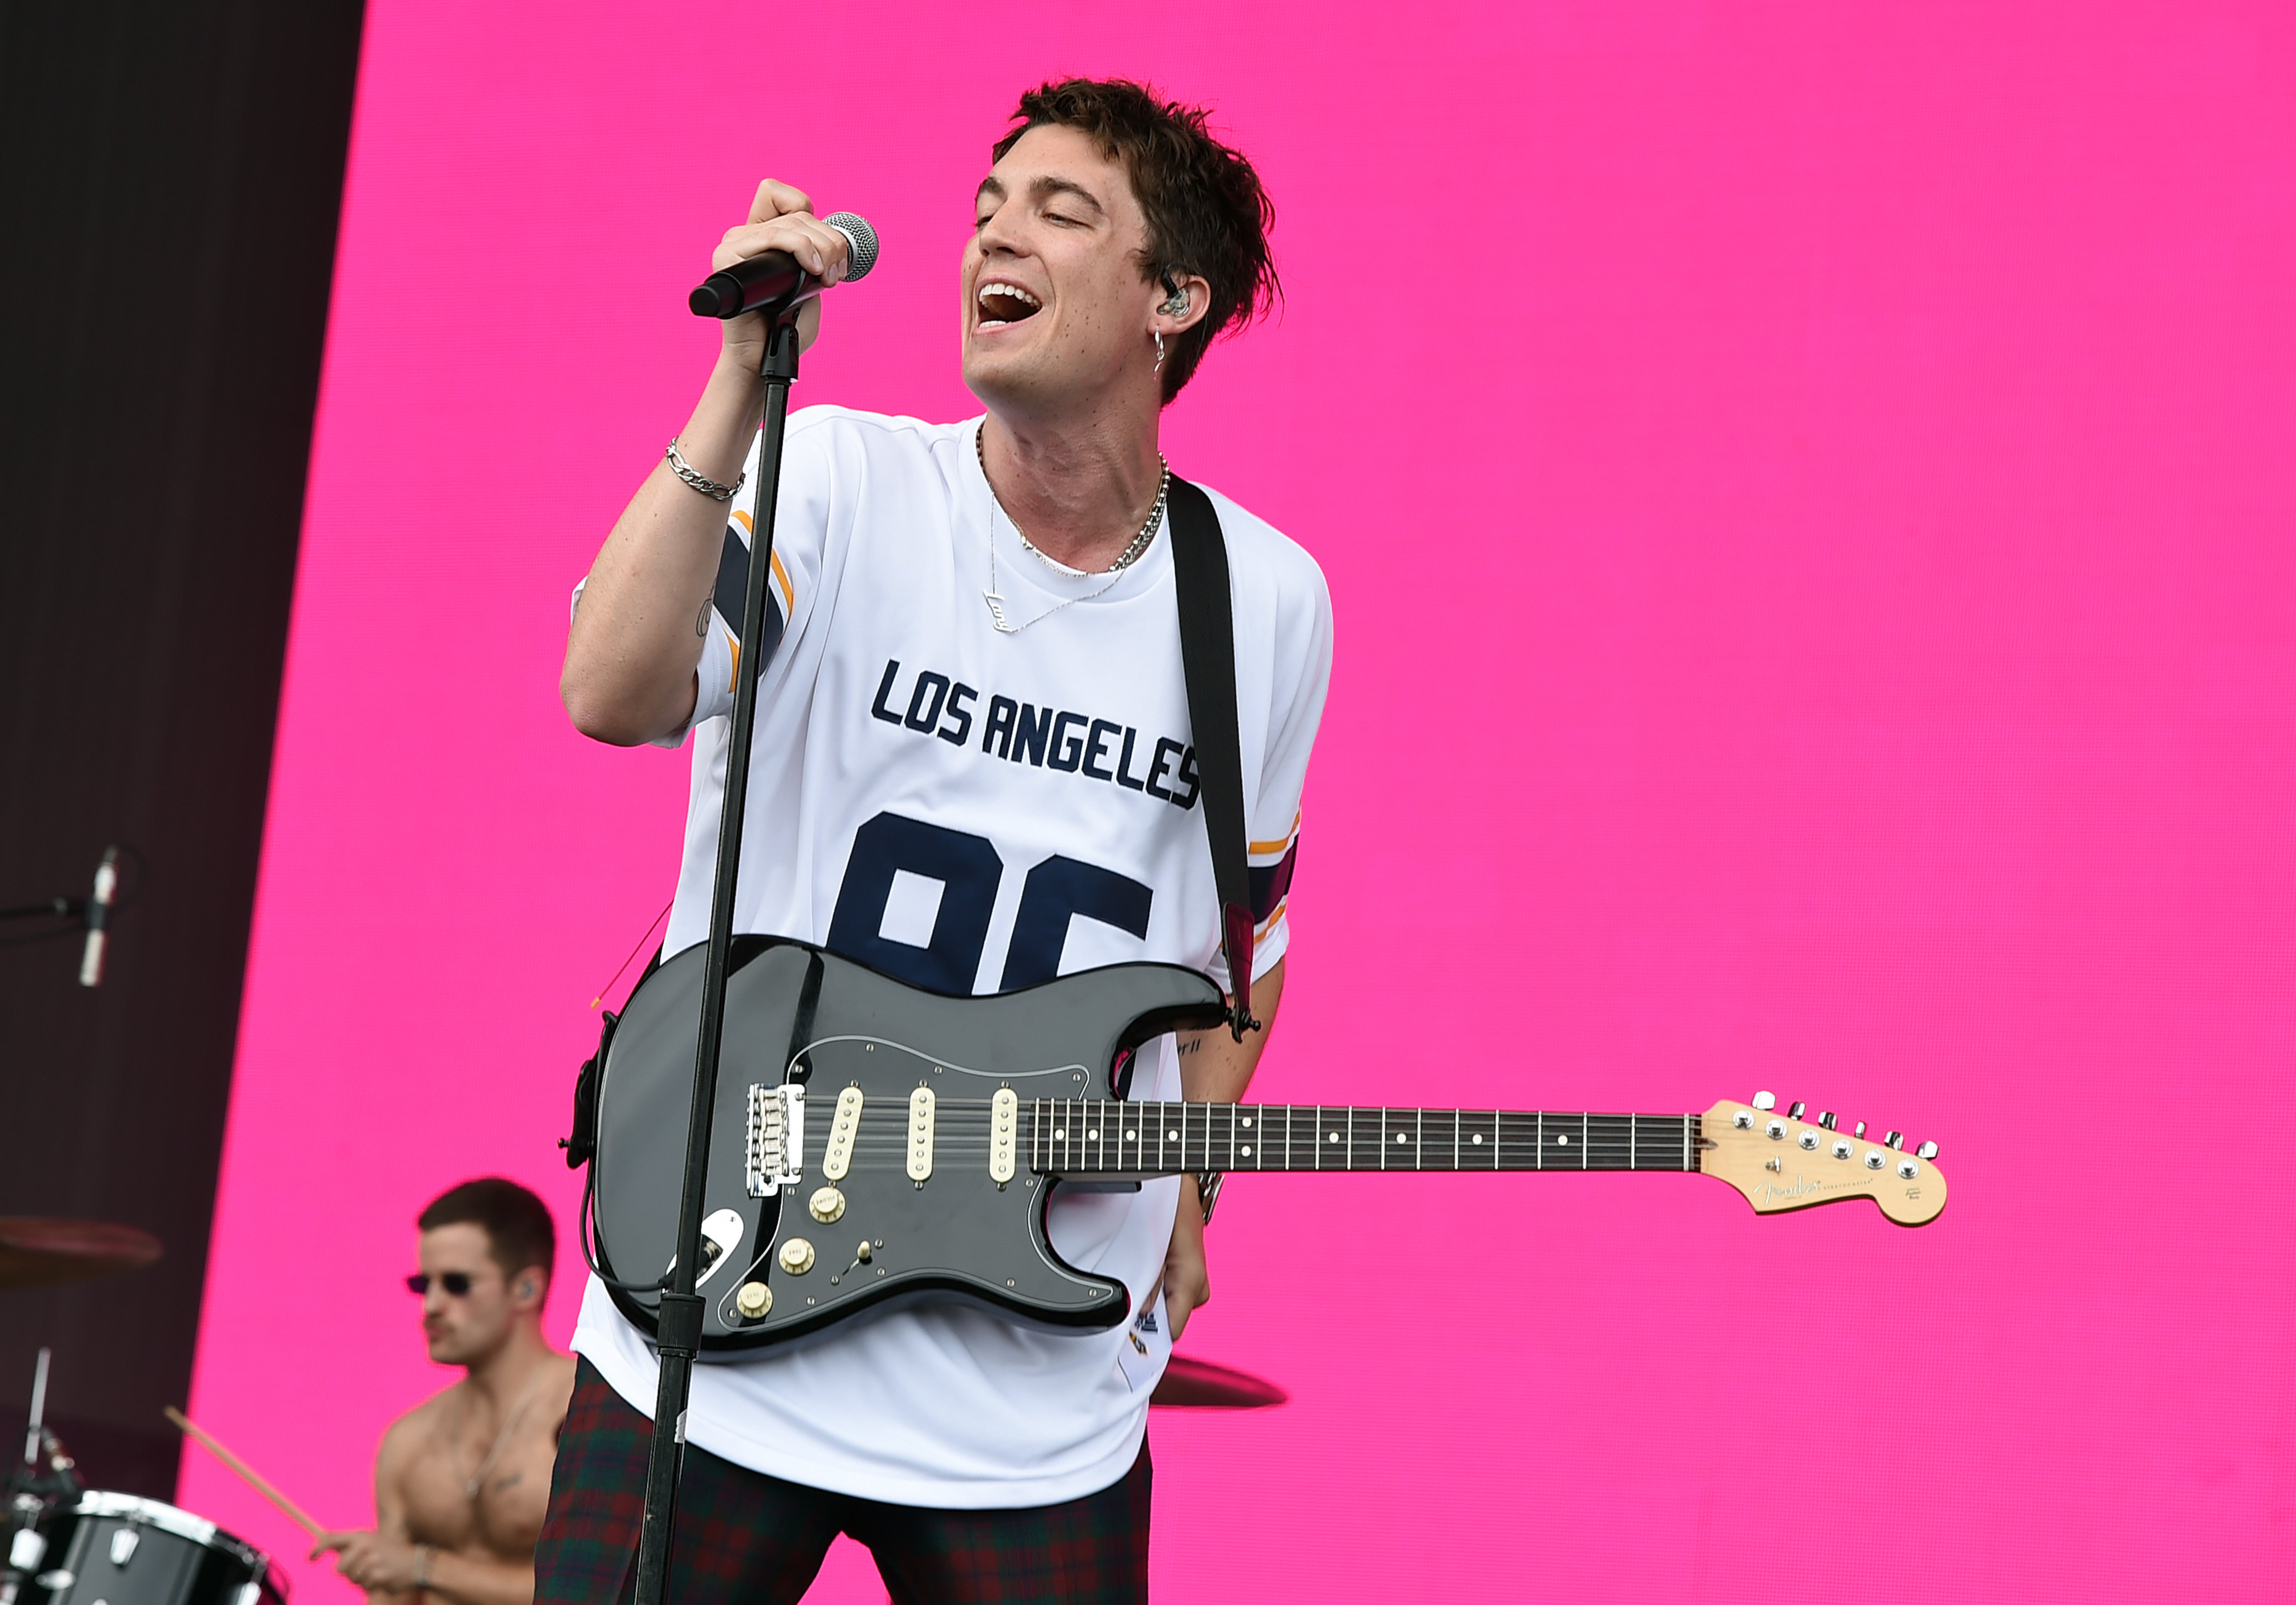 Paul Jason Klein of LANY performing at Coachella in 2018